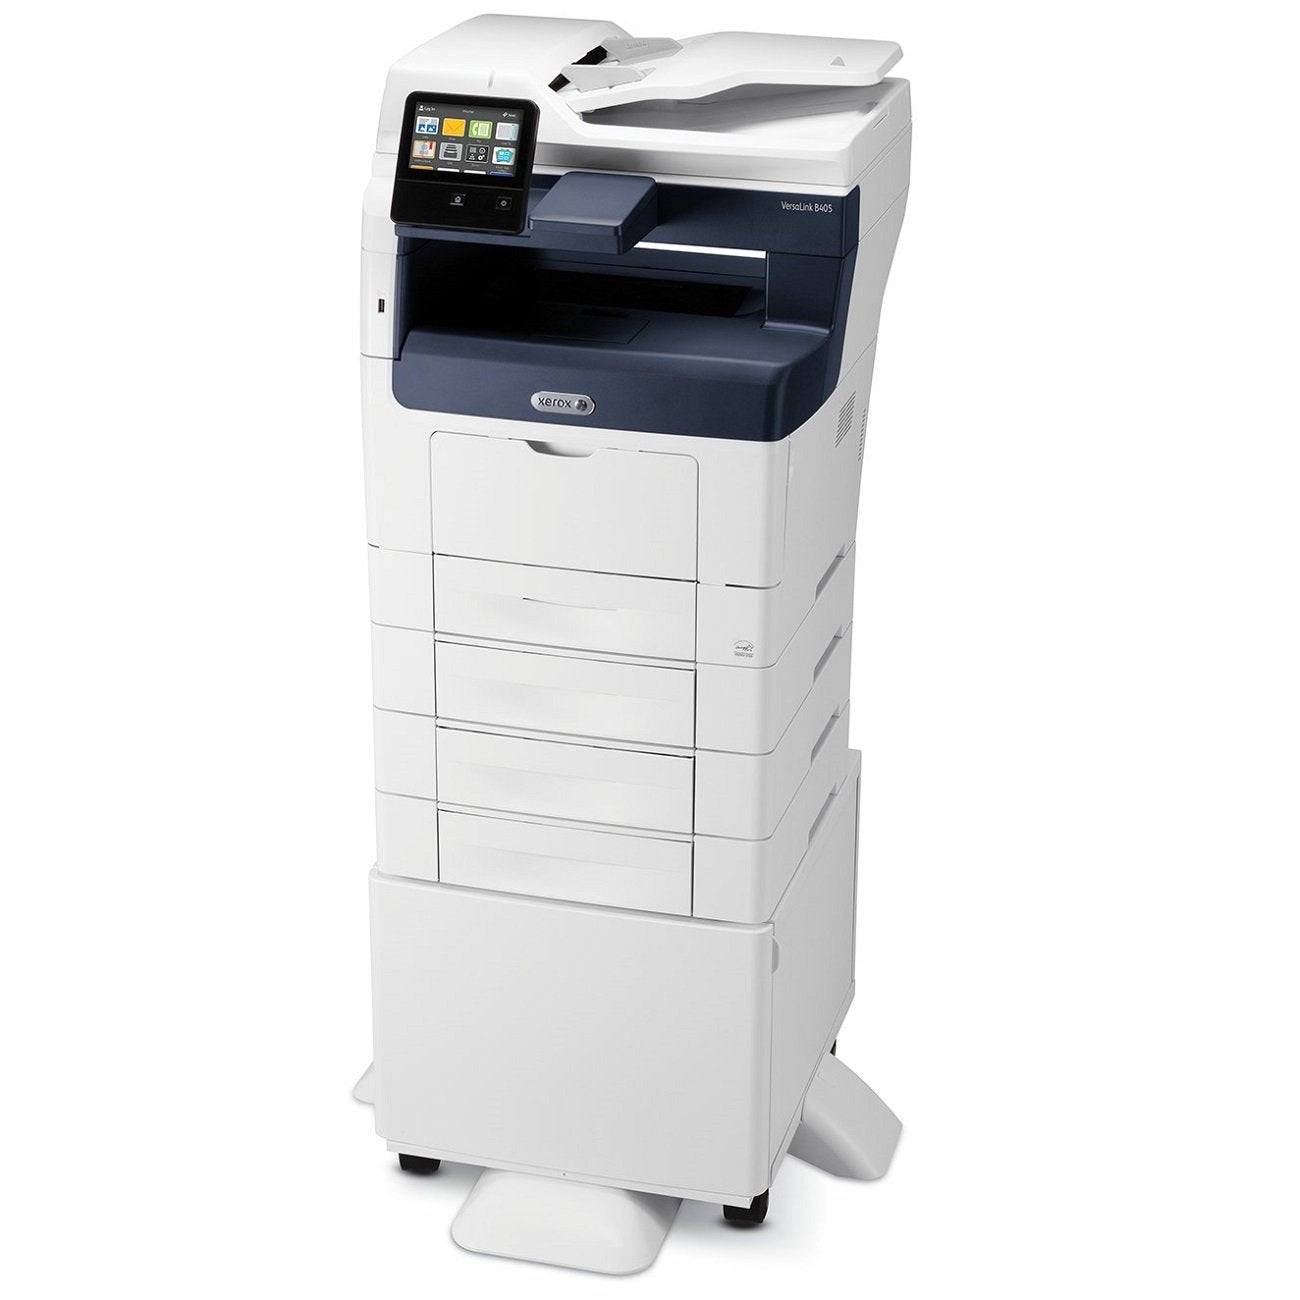 $28/Month Xerox VersaLink B405 B/W Monochrome Multifunction Printer Copier Scanner, 3 Paper Trays MFP (4th optional) With Support For Letter/Legal For Office